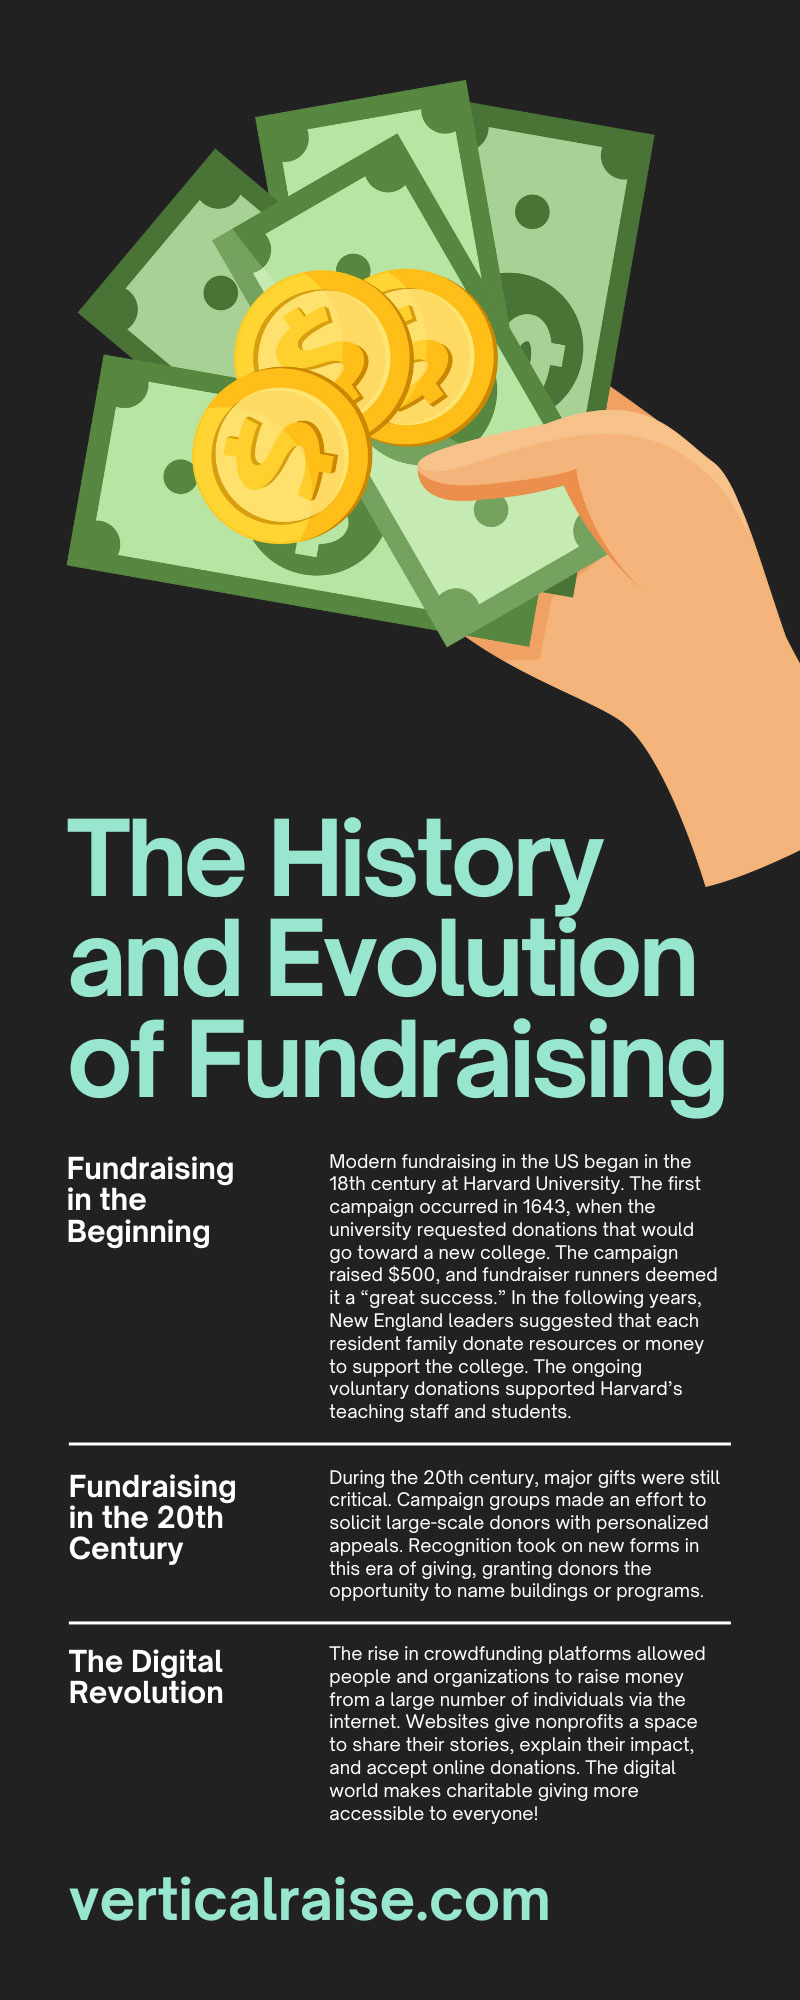 The History and Evolution of Fundraising